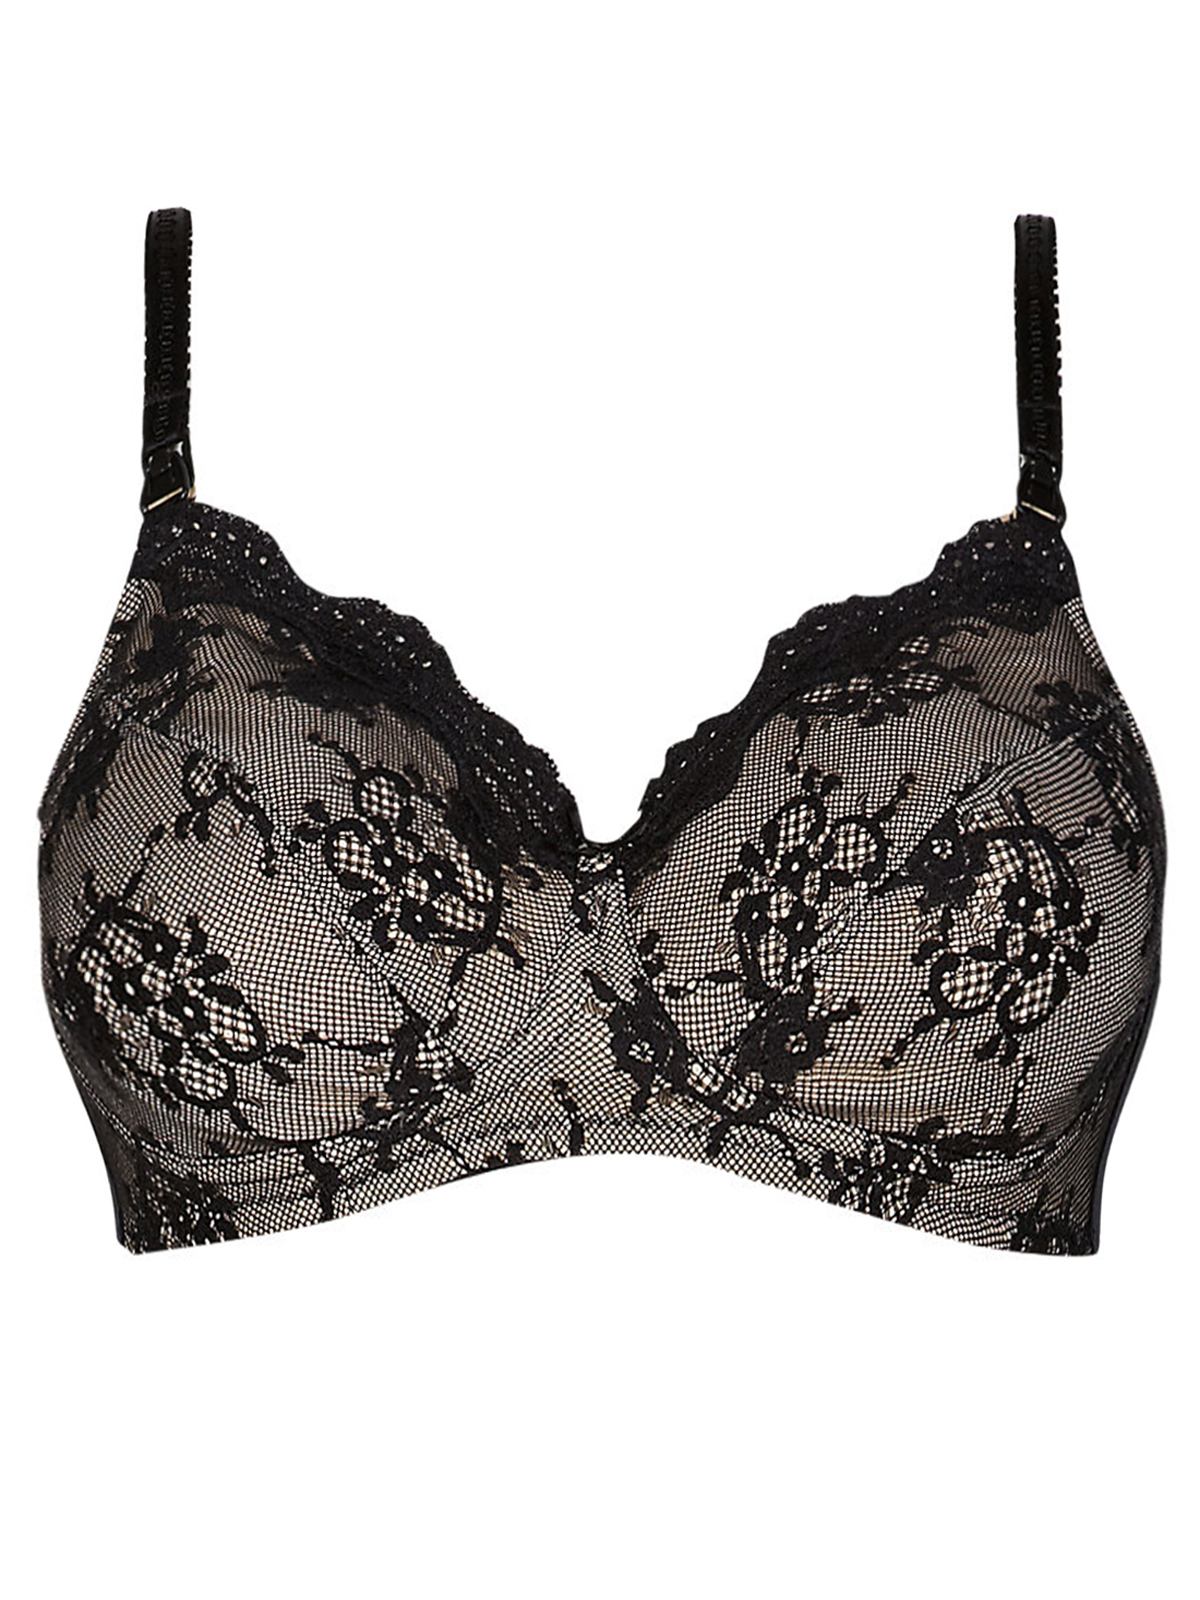 Marks and Spencer - - M&5 BLACK Cotton Rich Lace Maternity Bra - Size ...